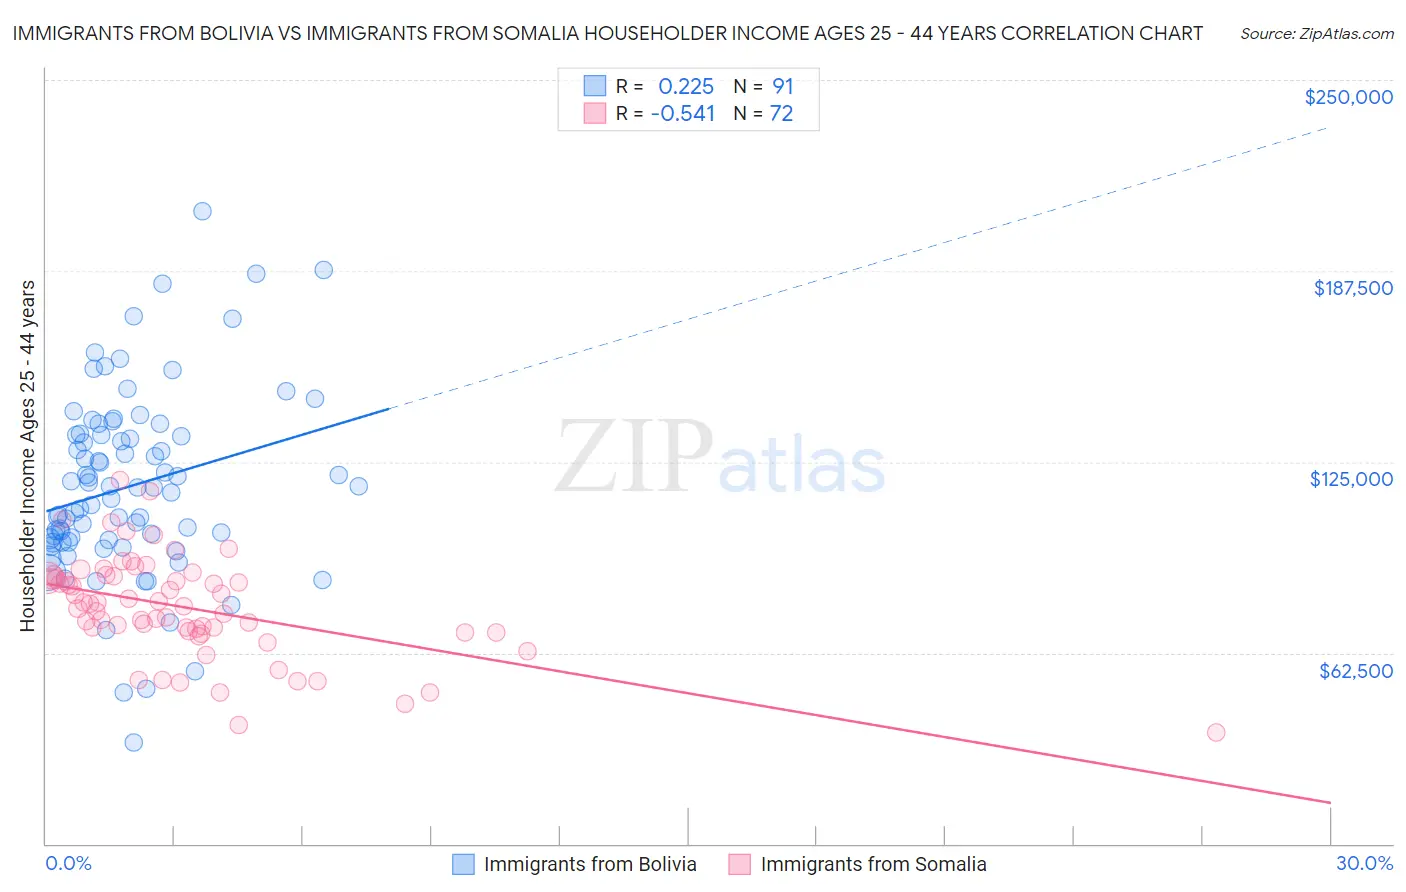 Immigrants from Bolivia vs Immigrants from Somalia Householder Income Ages 25 - 44 years